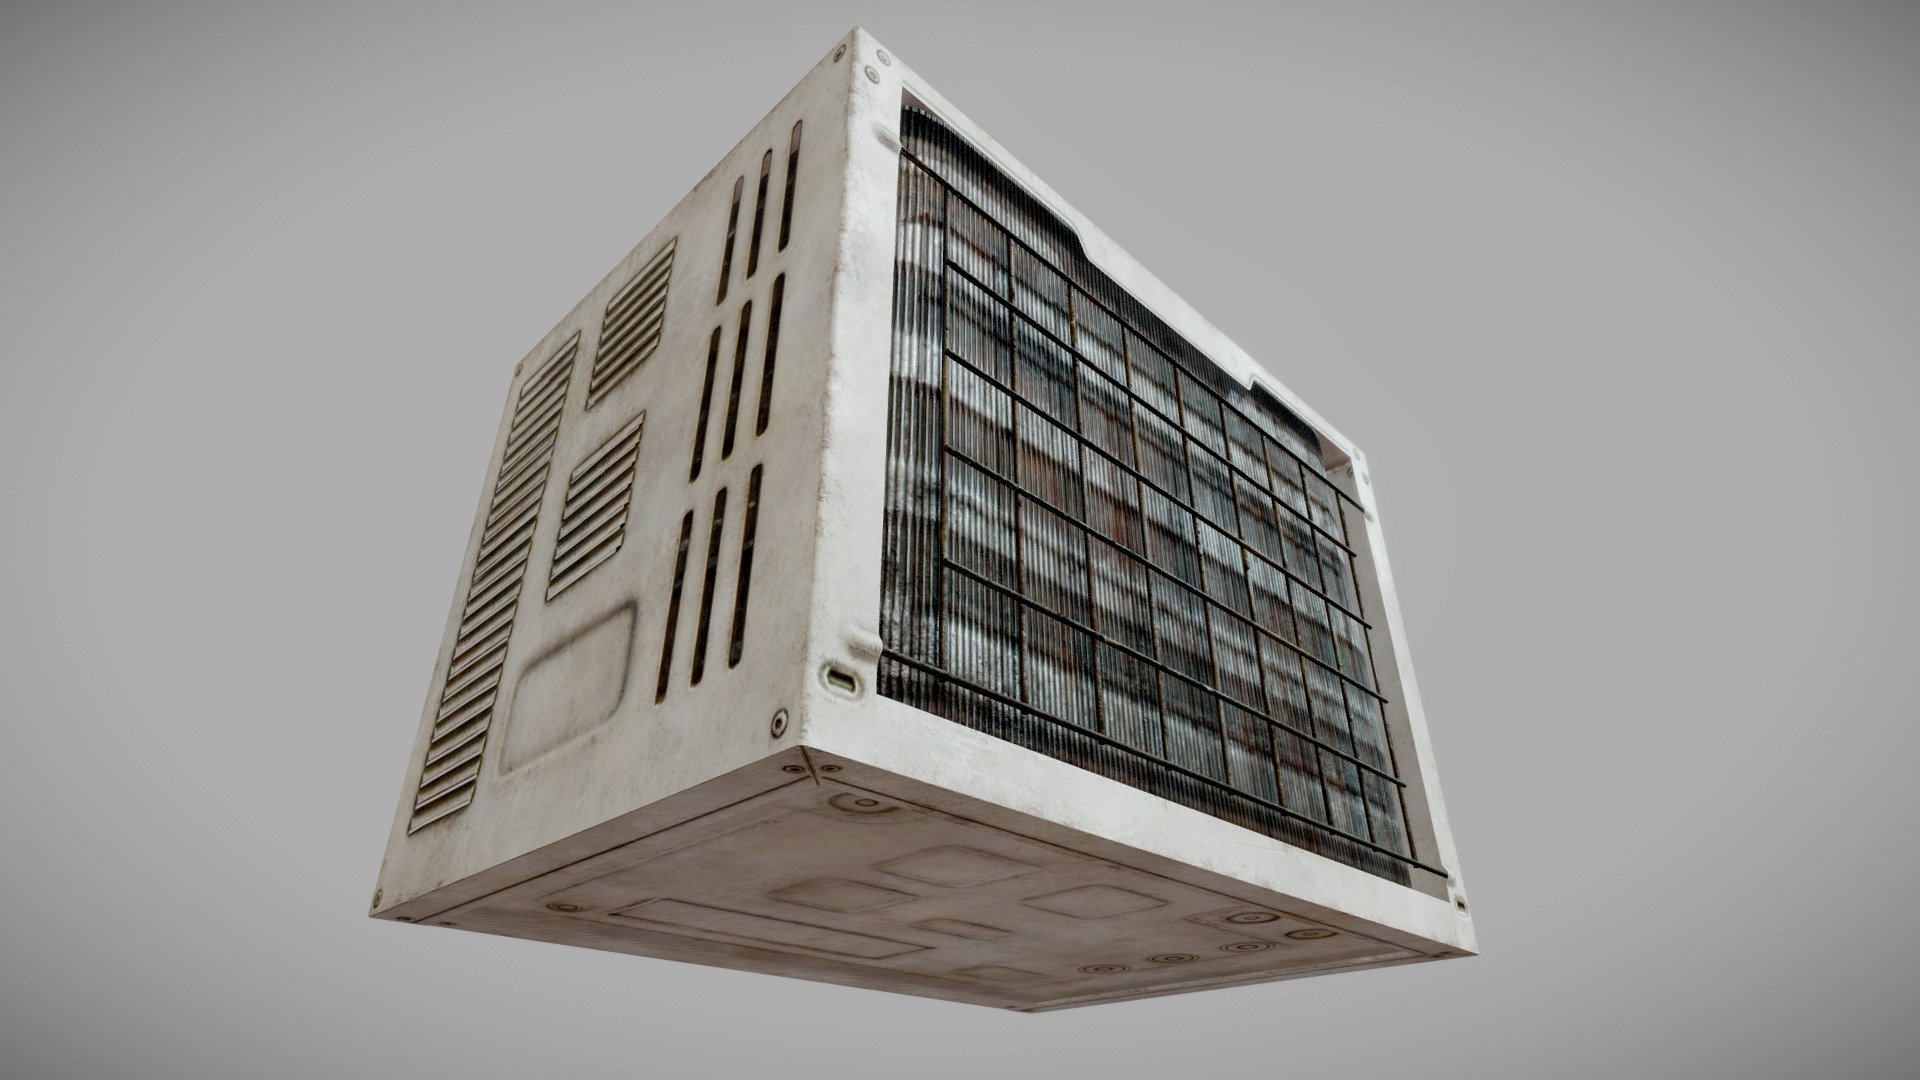 Rusty Air Conditioner 01 PBR

Very Detailed Very Low Poly Air Conditioner Unit for wall mounting, High-Quality PBR Textures.

Fits perfect for any PBR game as Environment Decoration etc.

Created with 3DSMAX, Zbrush and Substance Painter.

Standard Textures
Base Color, Metallic, Roughness, Height, AO, Normal, Maps

Unreal 4 Textures
Base Color, Normal, OcclusionRoughnessMetallic

Unity 5/2017 Textures
Albedo, SpecularSmoothness, Normal, and AO Maps

4096x4096 TGA Textures

Please Note, this PBR Textures Only. 

Low Poly Triangles 

994 Tris
615 Verts

File Formats :

.Max2019
.Max2018
.Max2017
.Max2016
.FBX
.OBJ
.3DS
.DAE - Rusty Air Conditioner 01 - PBR - Buy Royalty Free 3D model by GamePoly (@triix3d) 3d model